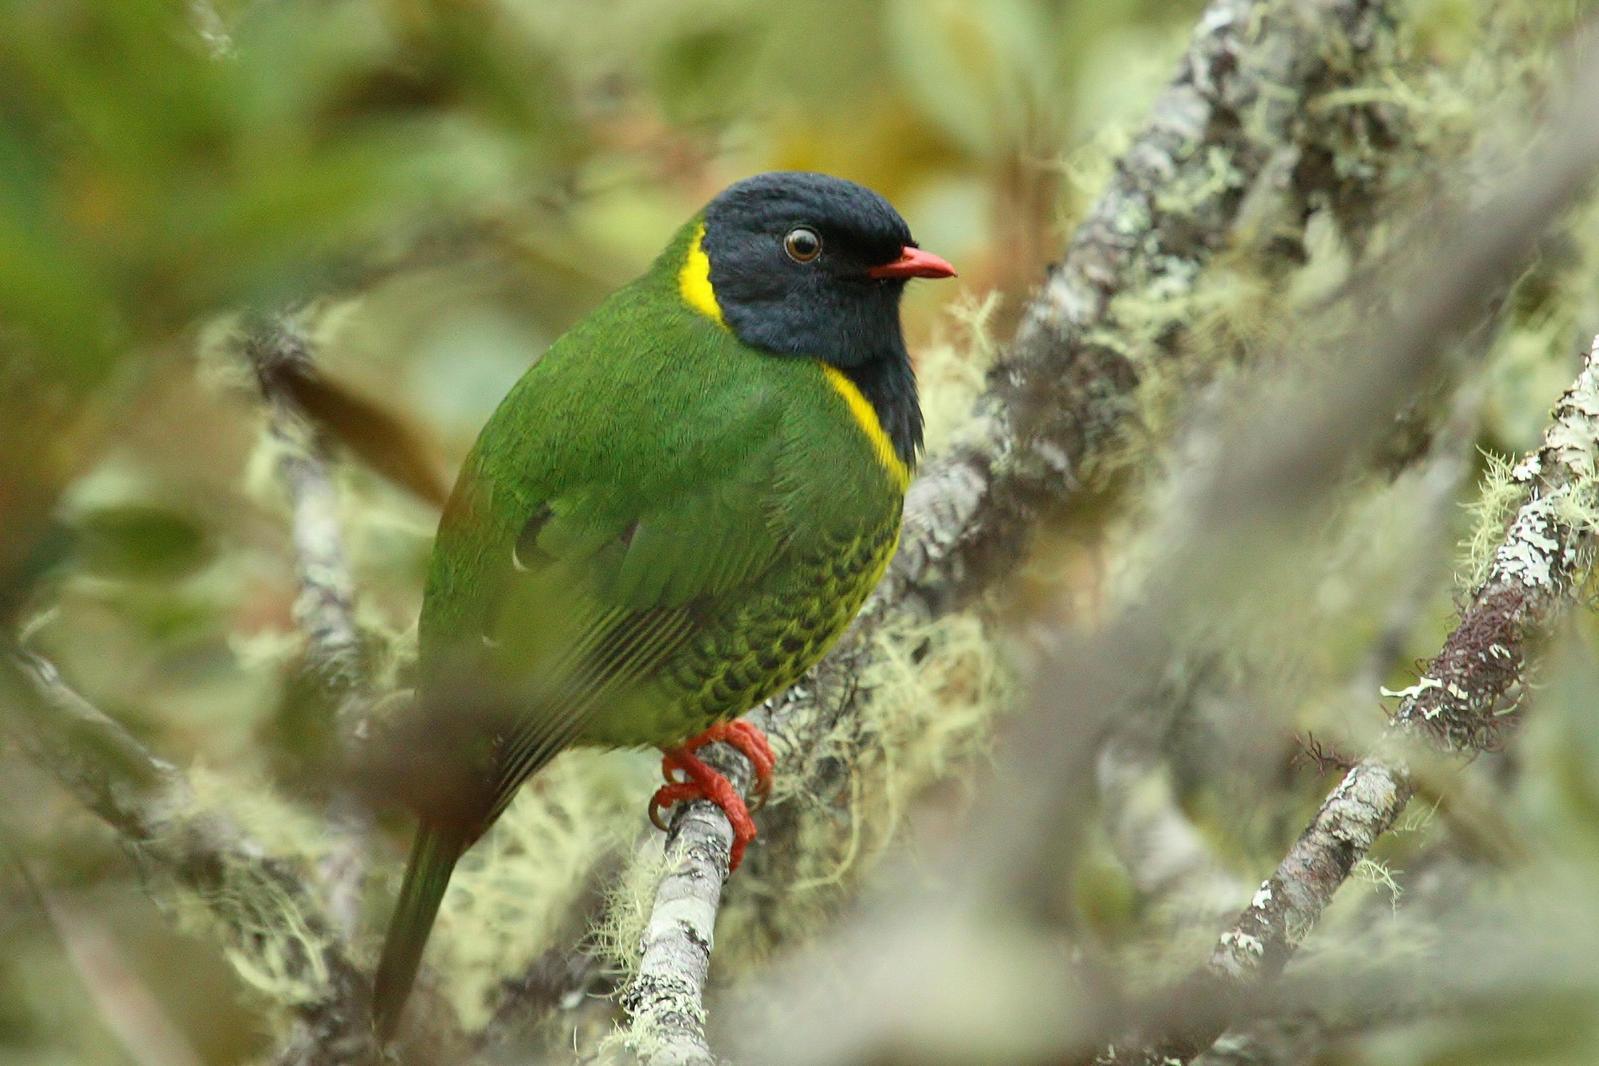 Band-tailed Fruiteater Photo by Matthew McCluskey